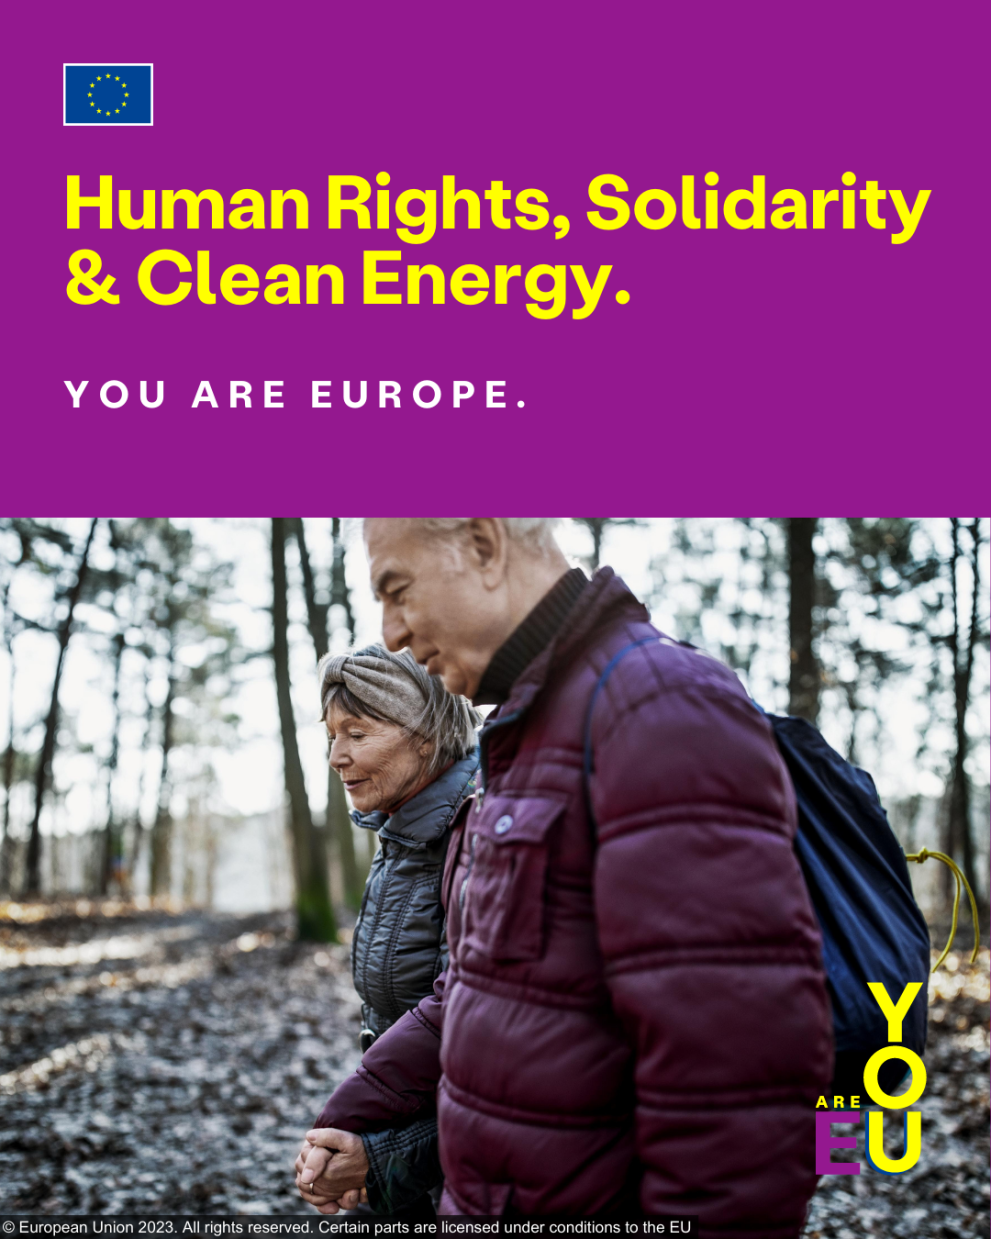 Human rights, solidarity and clean energy